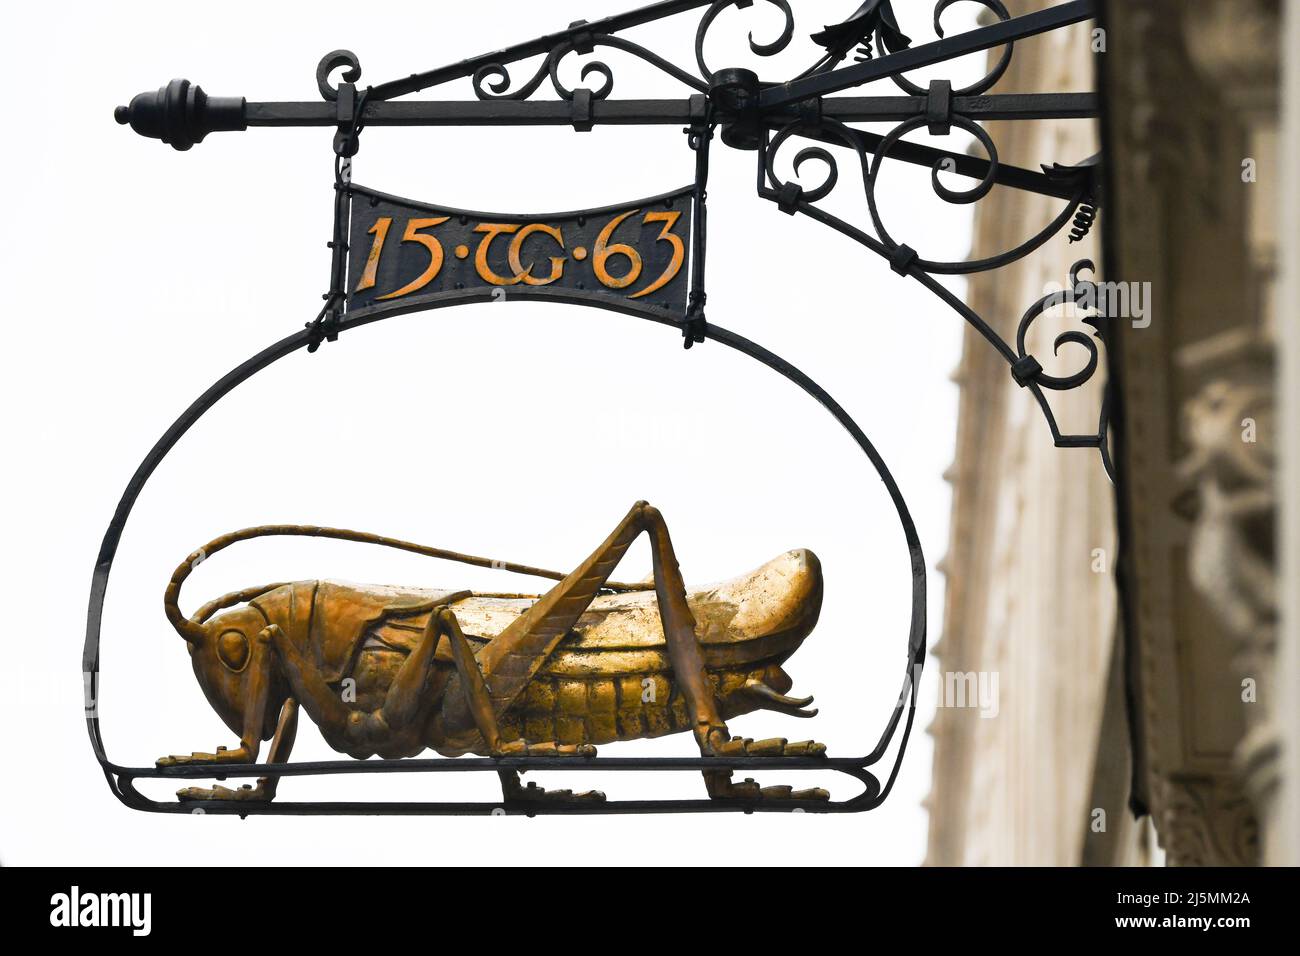 A golden grasshopper, one of the historic hanging signs in Lombard Street in the City of London Stock Photo